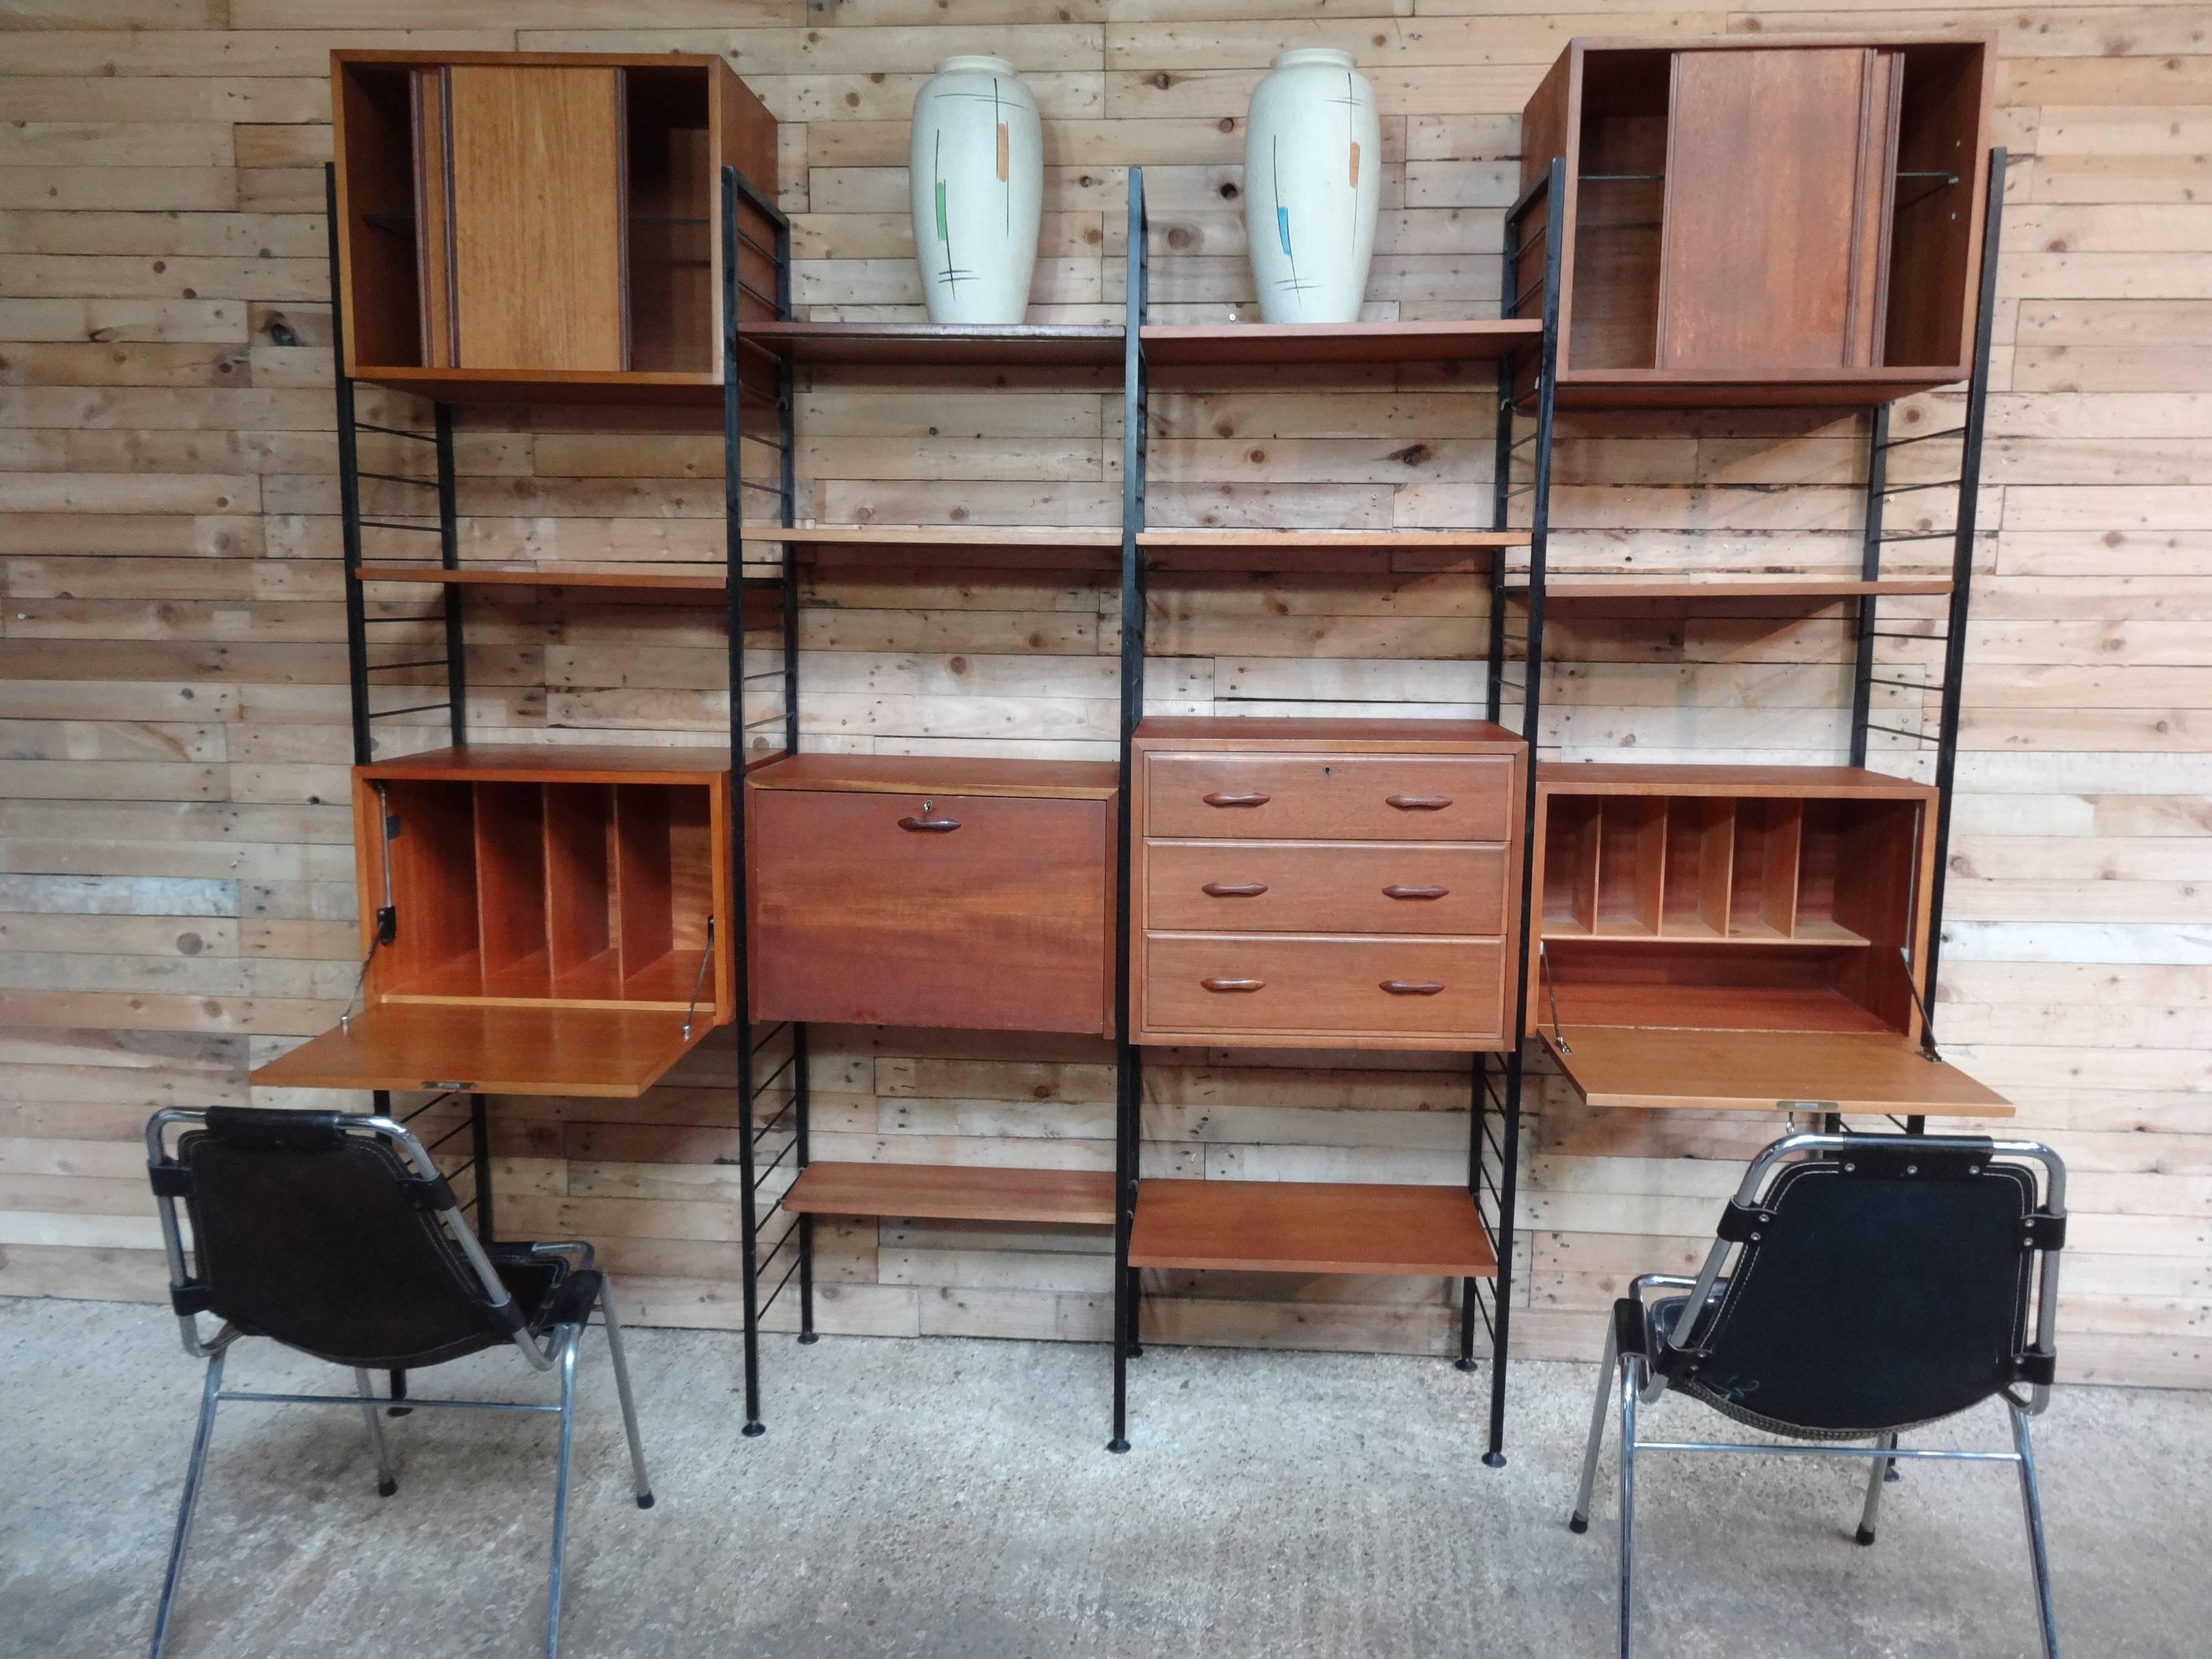 XXL room divider / freestanding black metal framed teak book shelving / storage unit with his and her desk.

Stunning freestanding Ladderax wall system / room divider from the 1960s, it has a two desks and lots and lots of bookshelves and